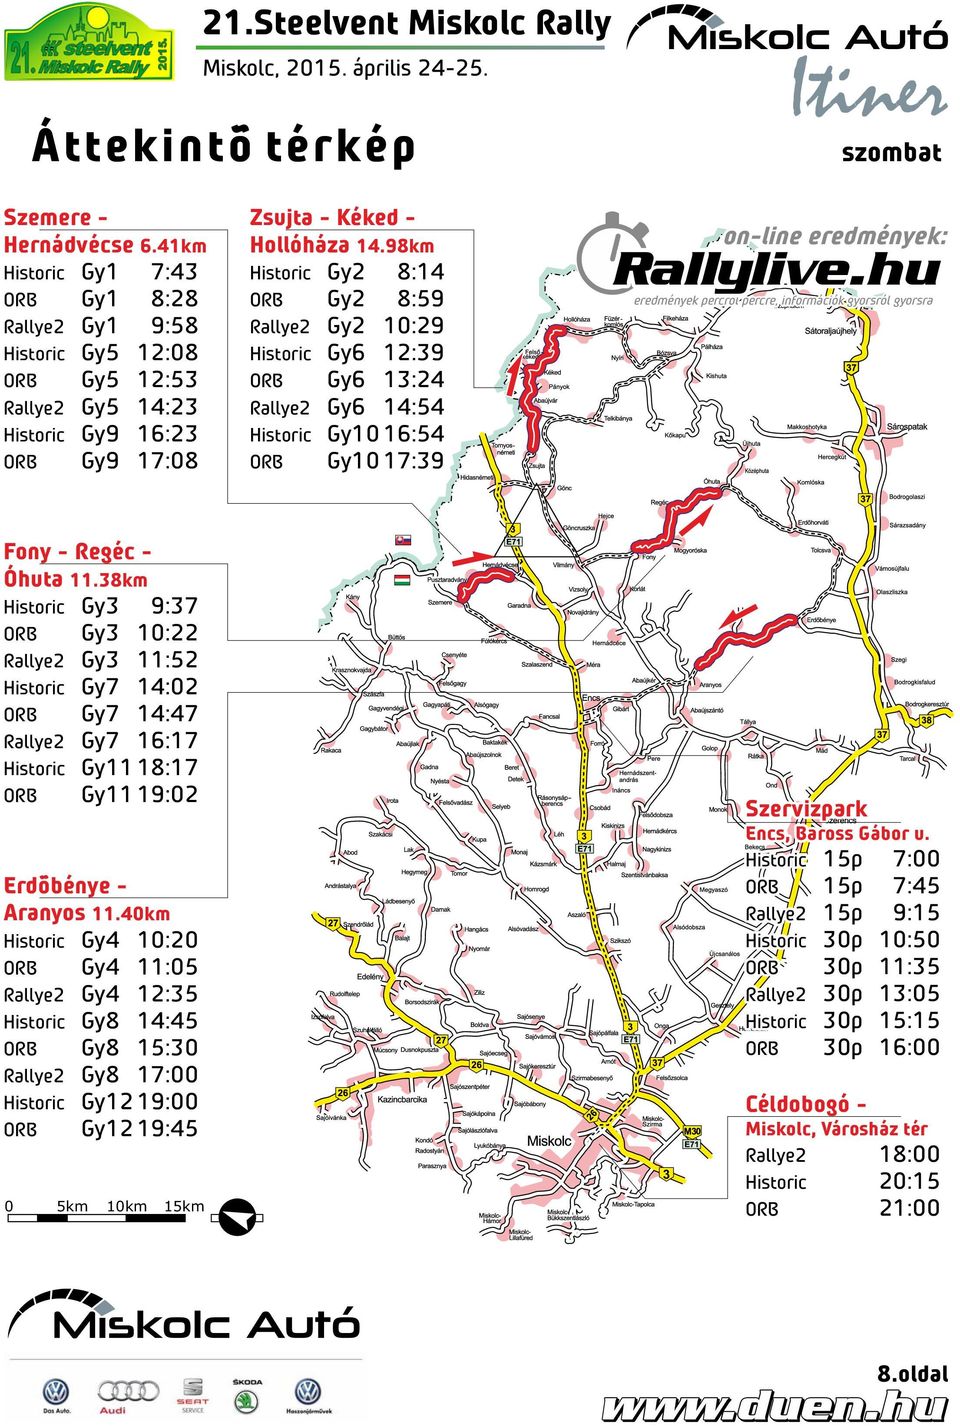 98km Historic Gy2 8:14 ORB Gy2 8:59 Rallye2 Gy2 10:29 Historic Gy6 12:39 ORB Gy6 13:24 Rallye2 Gy6 14:54 Historic Gy10 16:54 ORB Gy10 17:39 Fony - Regéc - Óhuta 11.